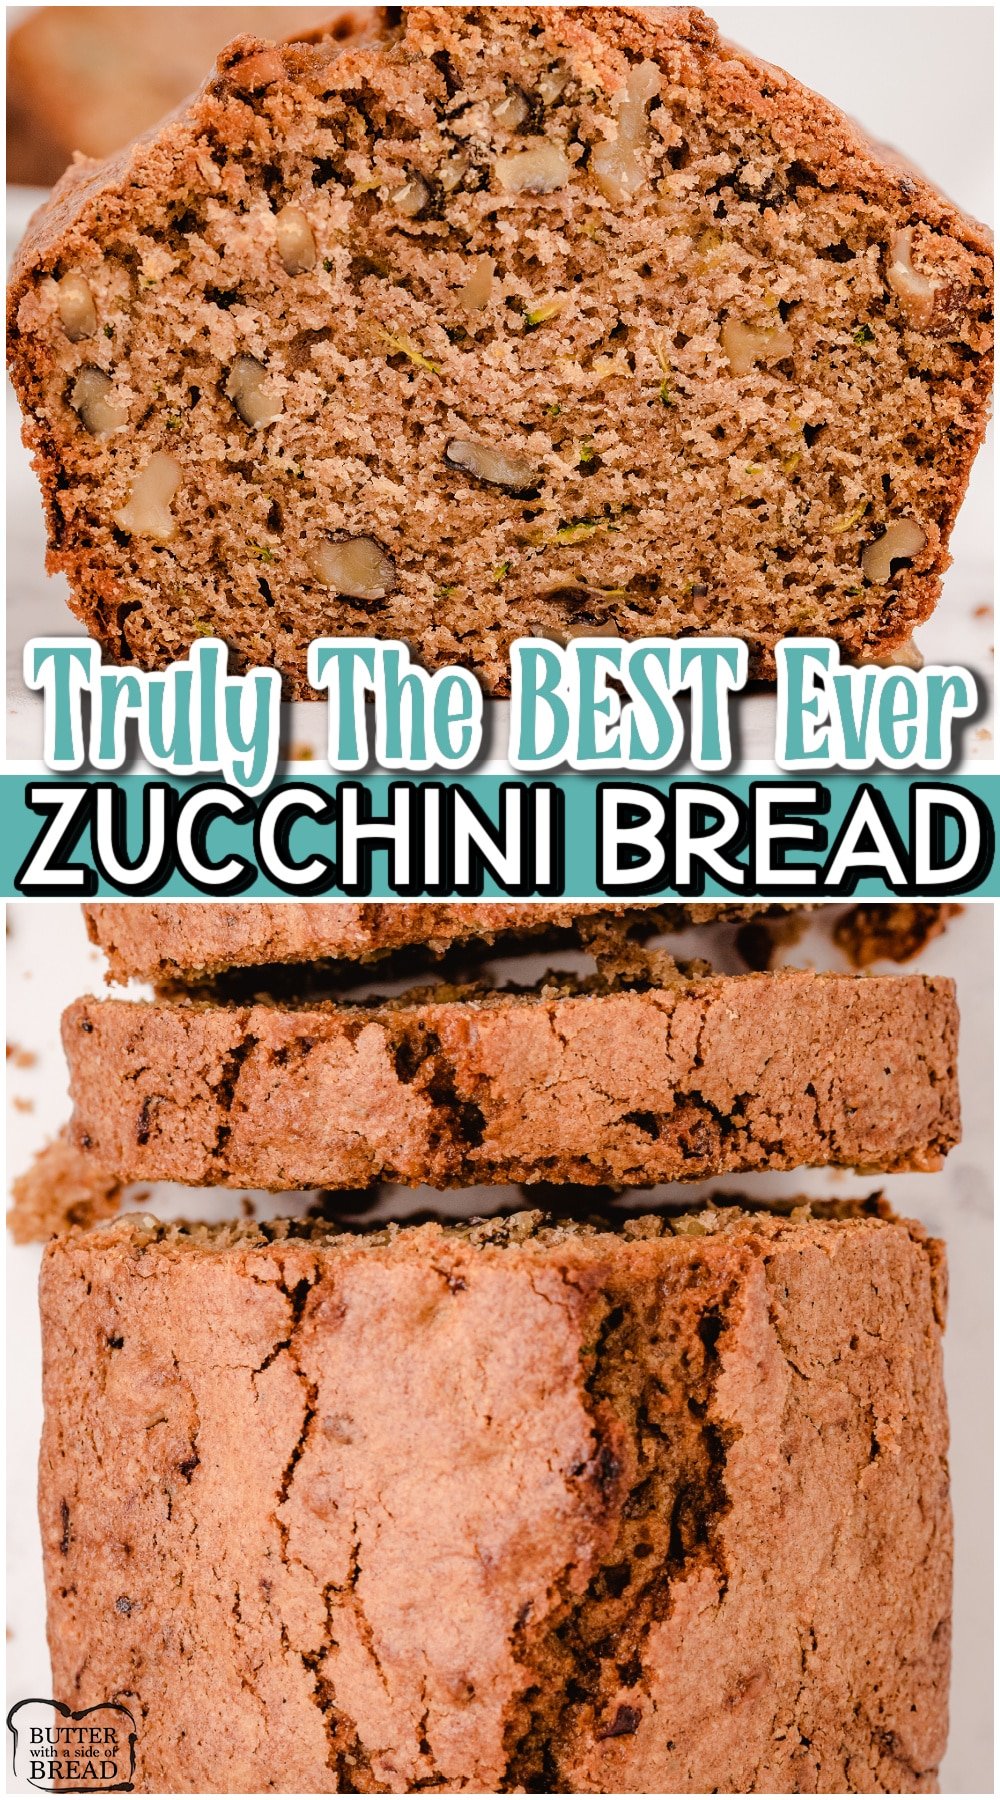 Our Best Ever Zucchini Bread recipe is a MUST TRY! This popular zucchini quick bread recipe is easy to make and has the perfect blend of delicious spices.